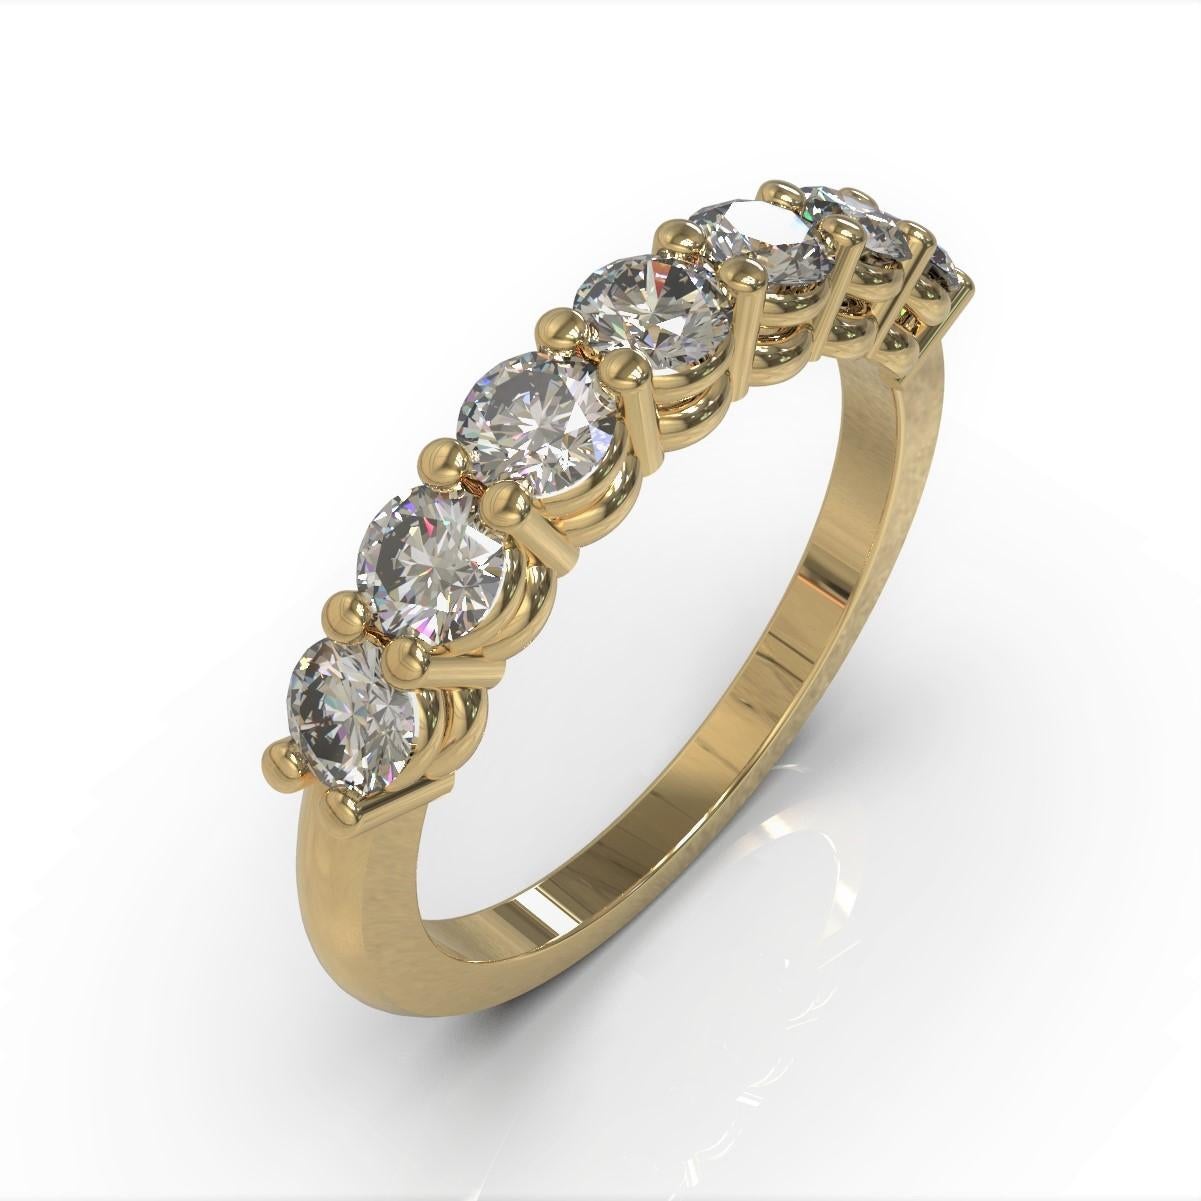 Seven Diamonds Bridal Ring

This stunning bridal ring set with seven beautiful round brilliant cut diamonds, this lovely band is well suited as a dress, wedding or other special commitment ring.

Round brilliant cut diamonds: FG colour, VS-SI